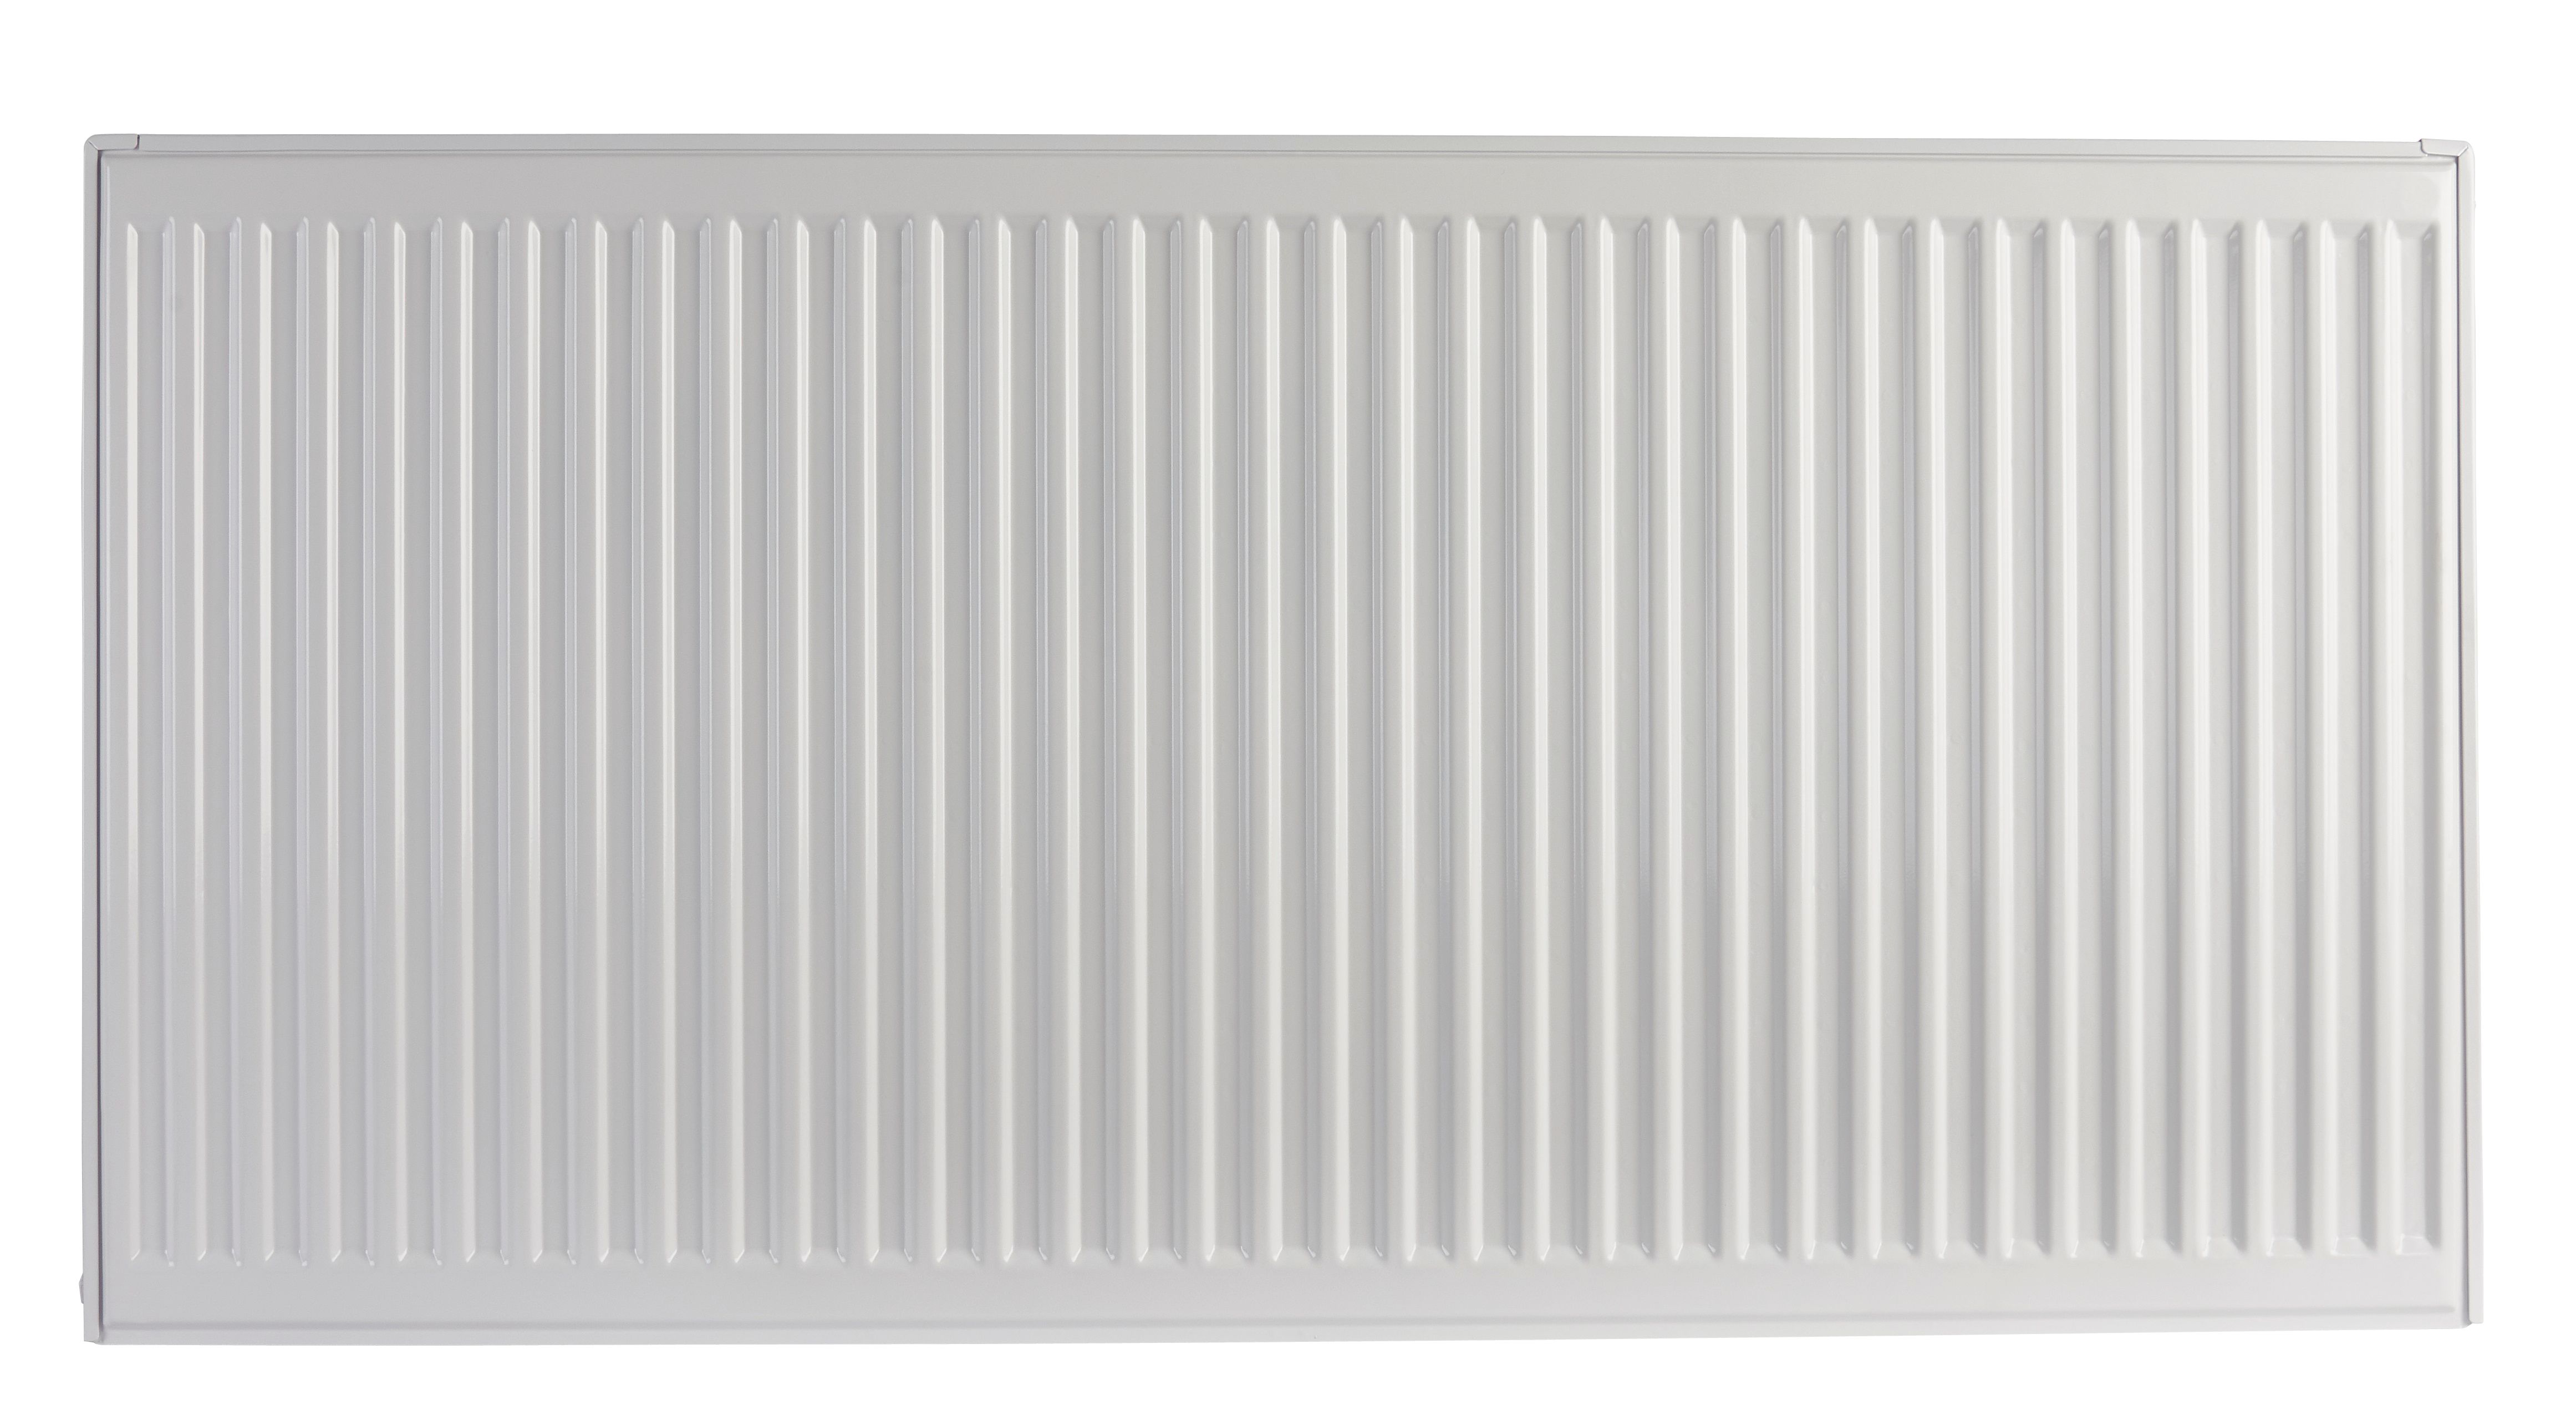 Image of Homeline by Stelrad 500 x 900mm Type 11 Single Panel Single Convector Radiator